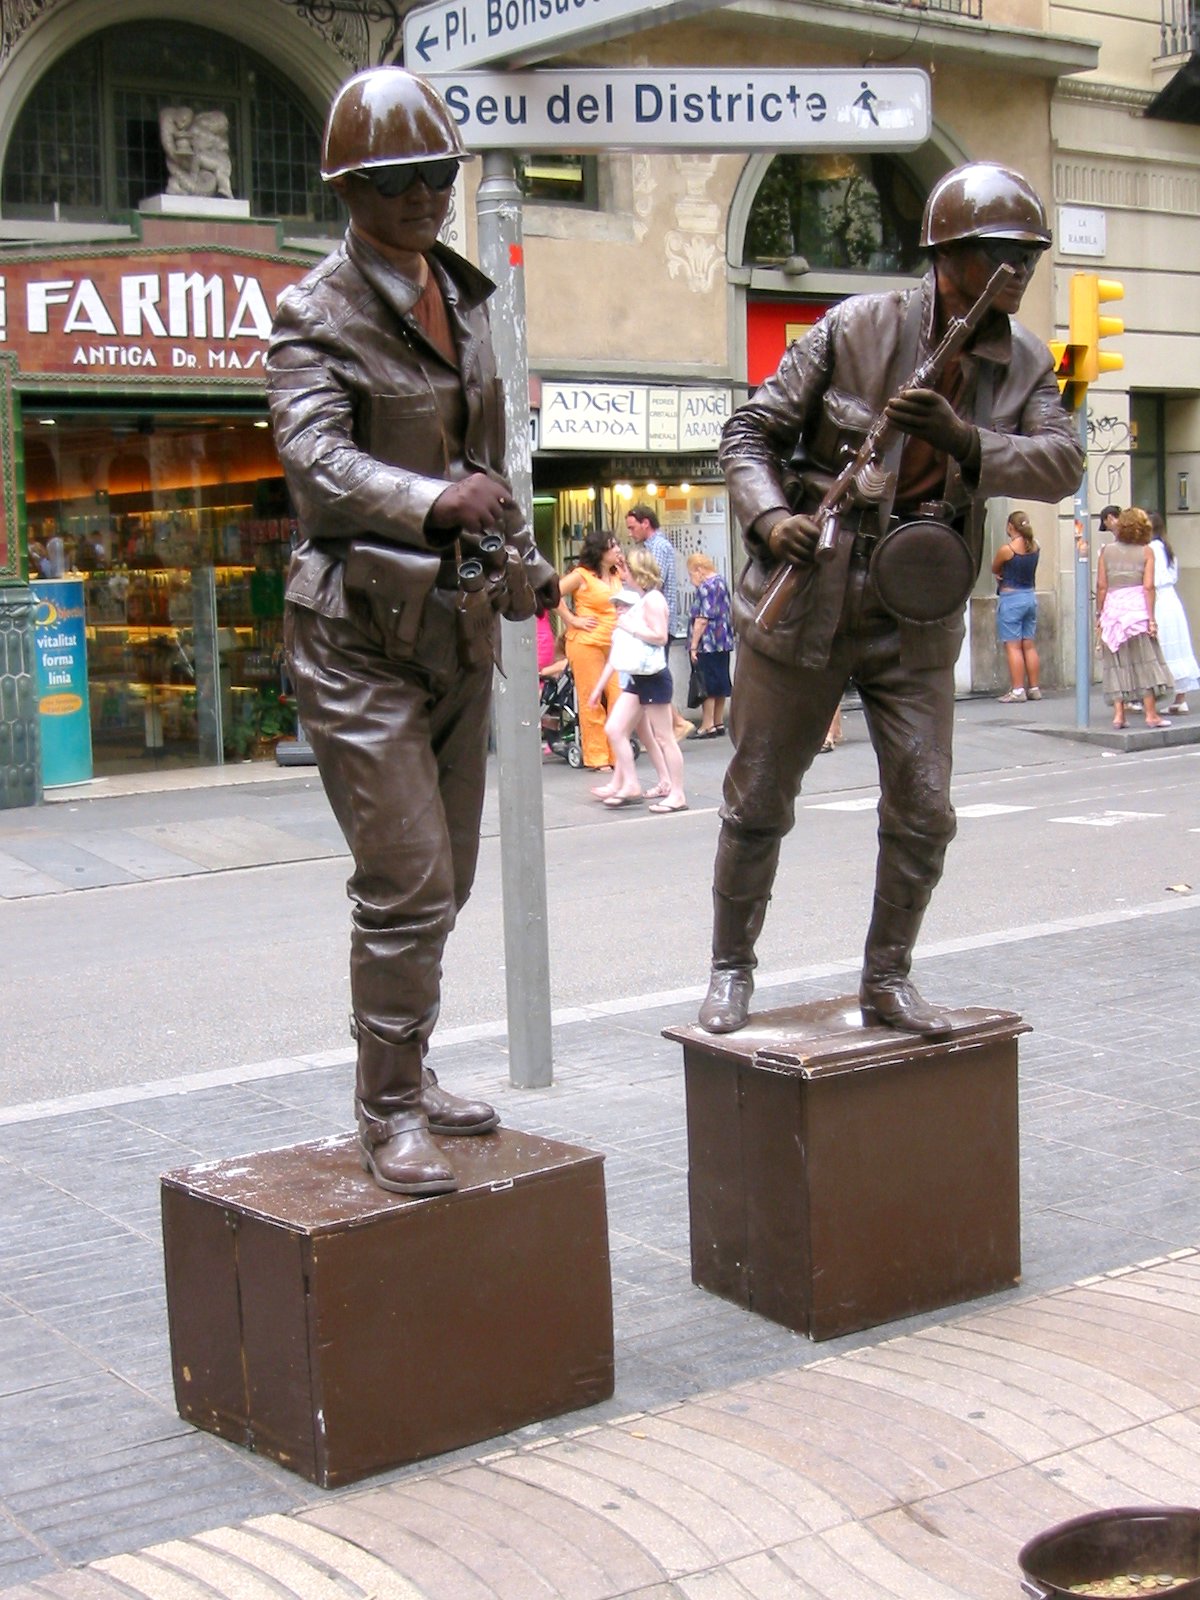 two statues of two soldiers are near a street sign